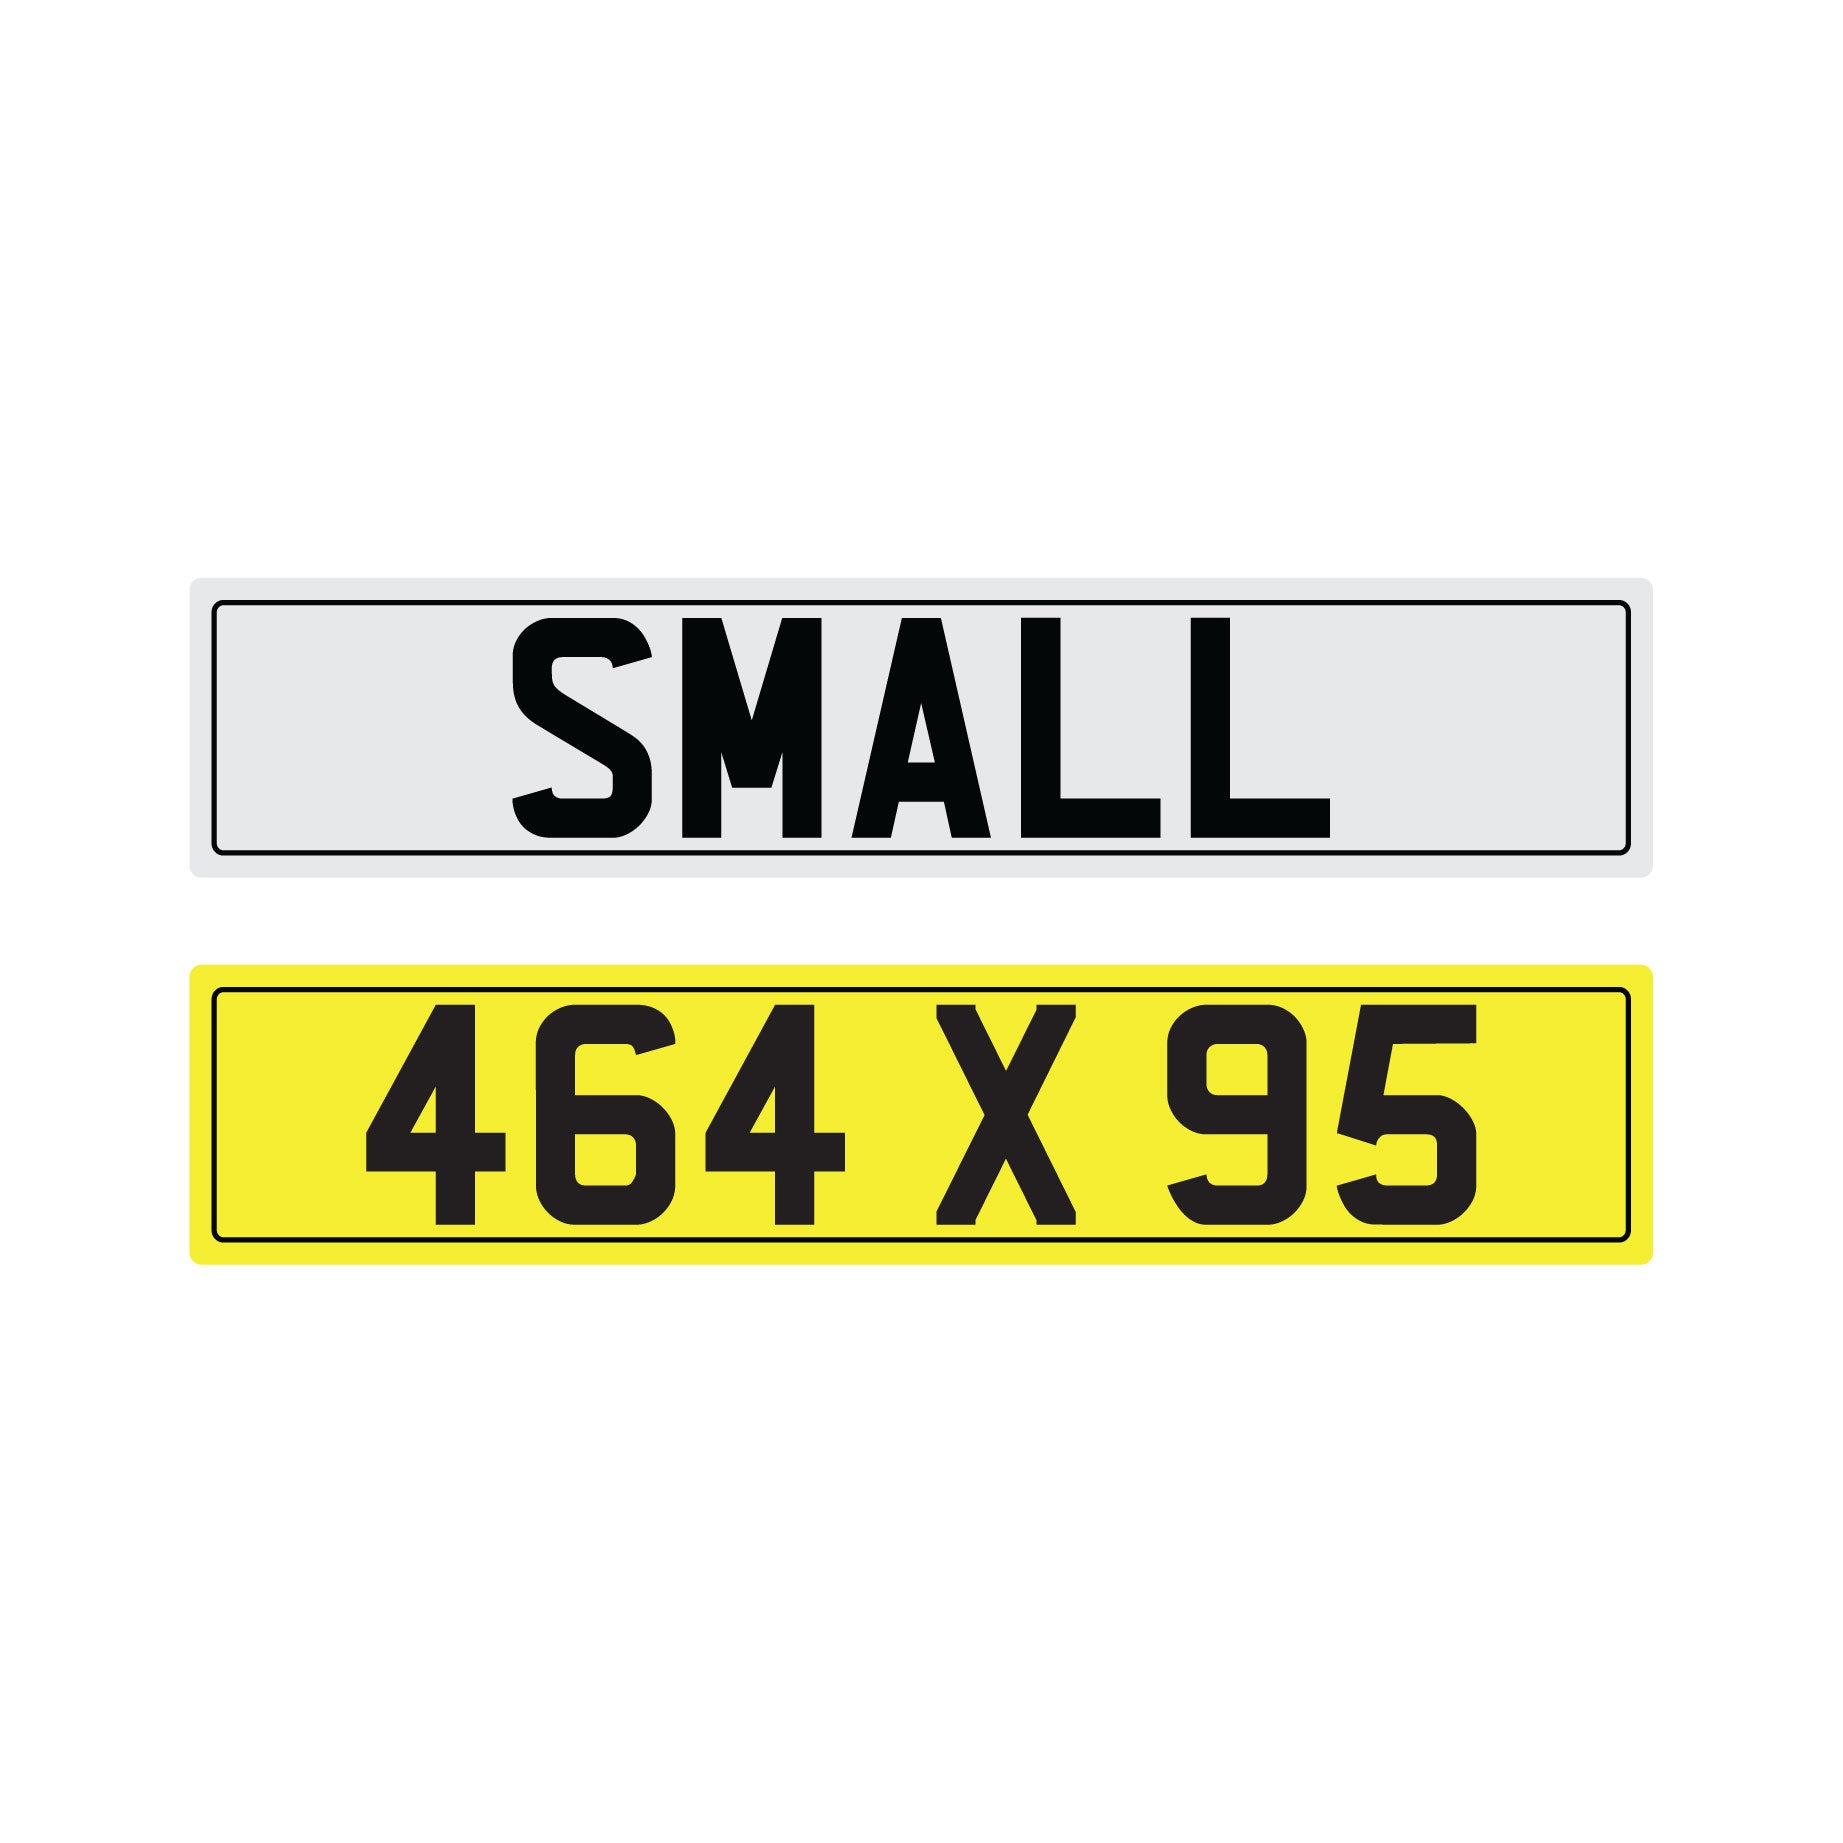 Small legal stick on number plates